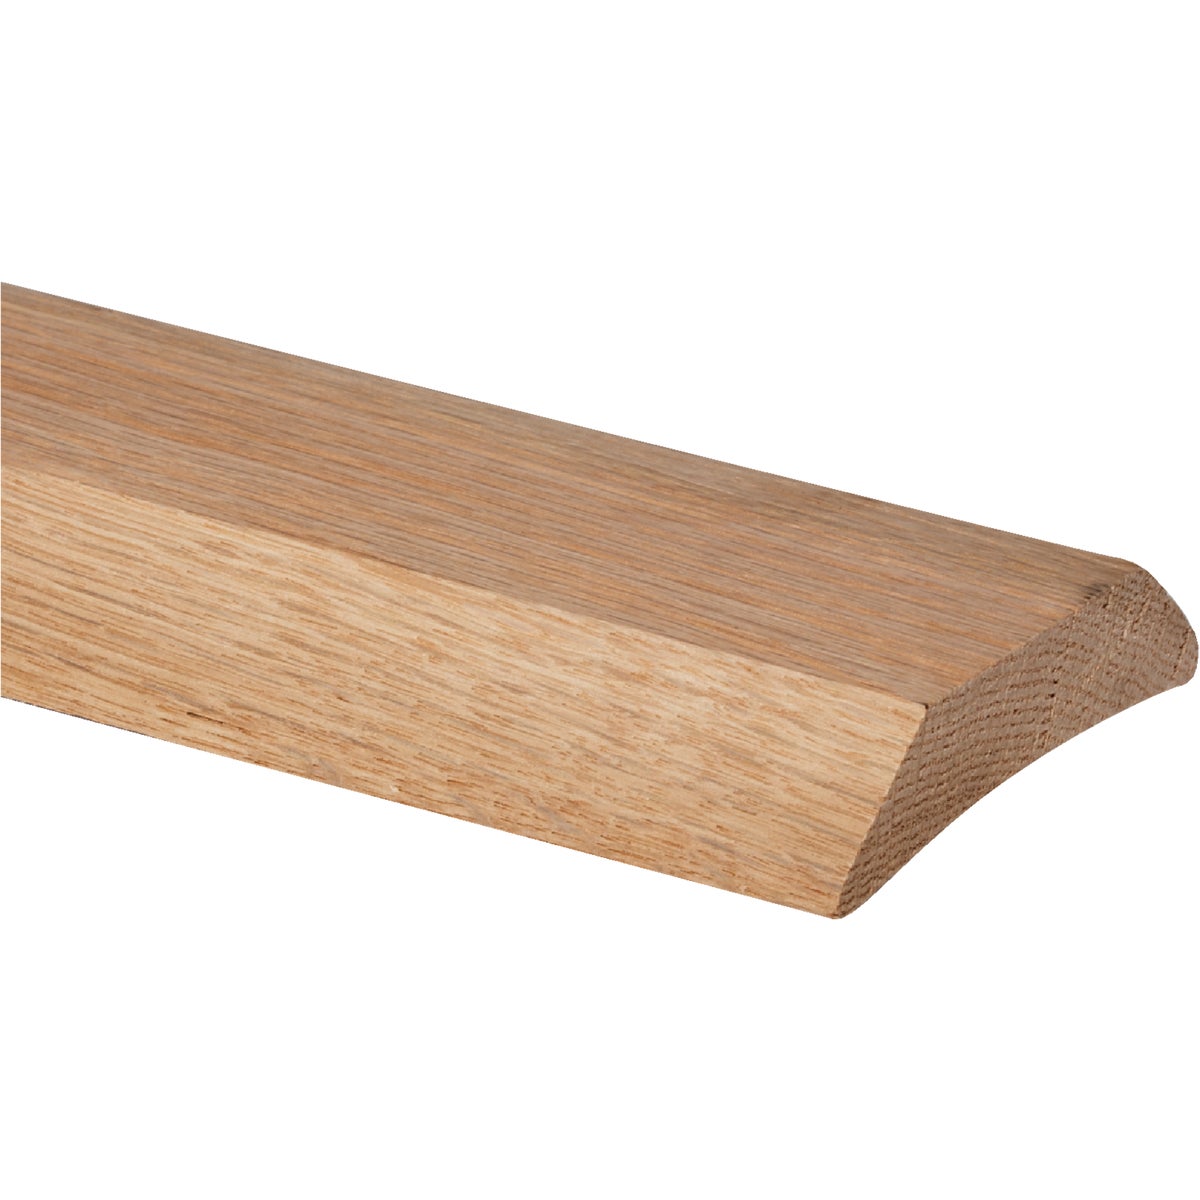 Item 272108, Clear hardwood provides a durable residential threshold.